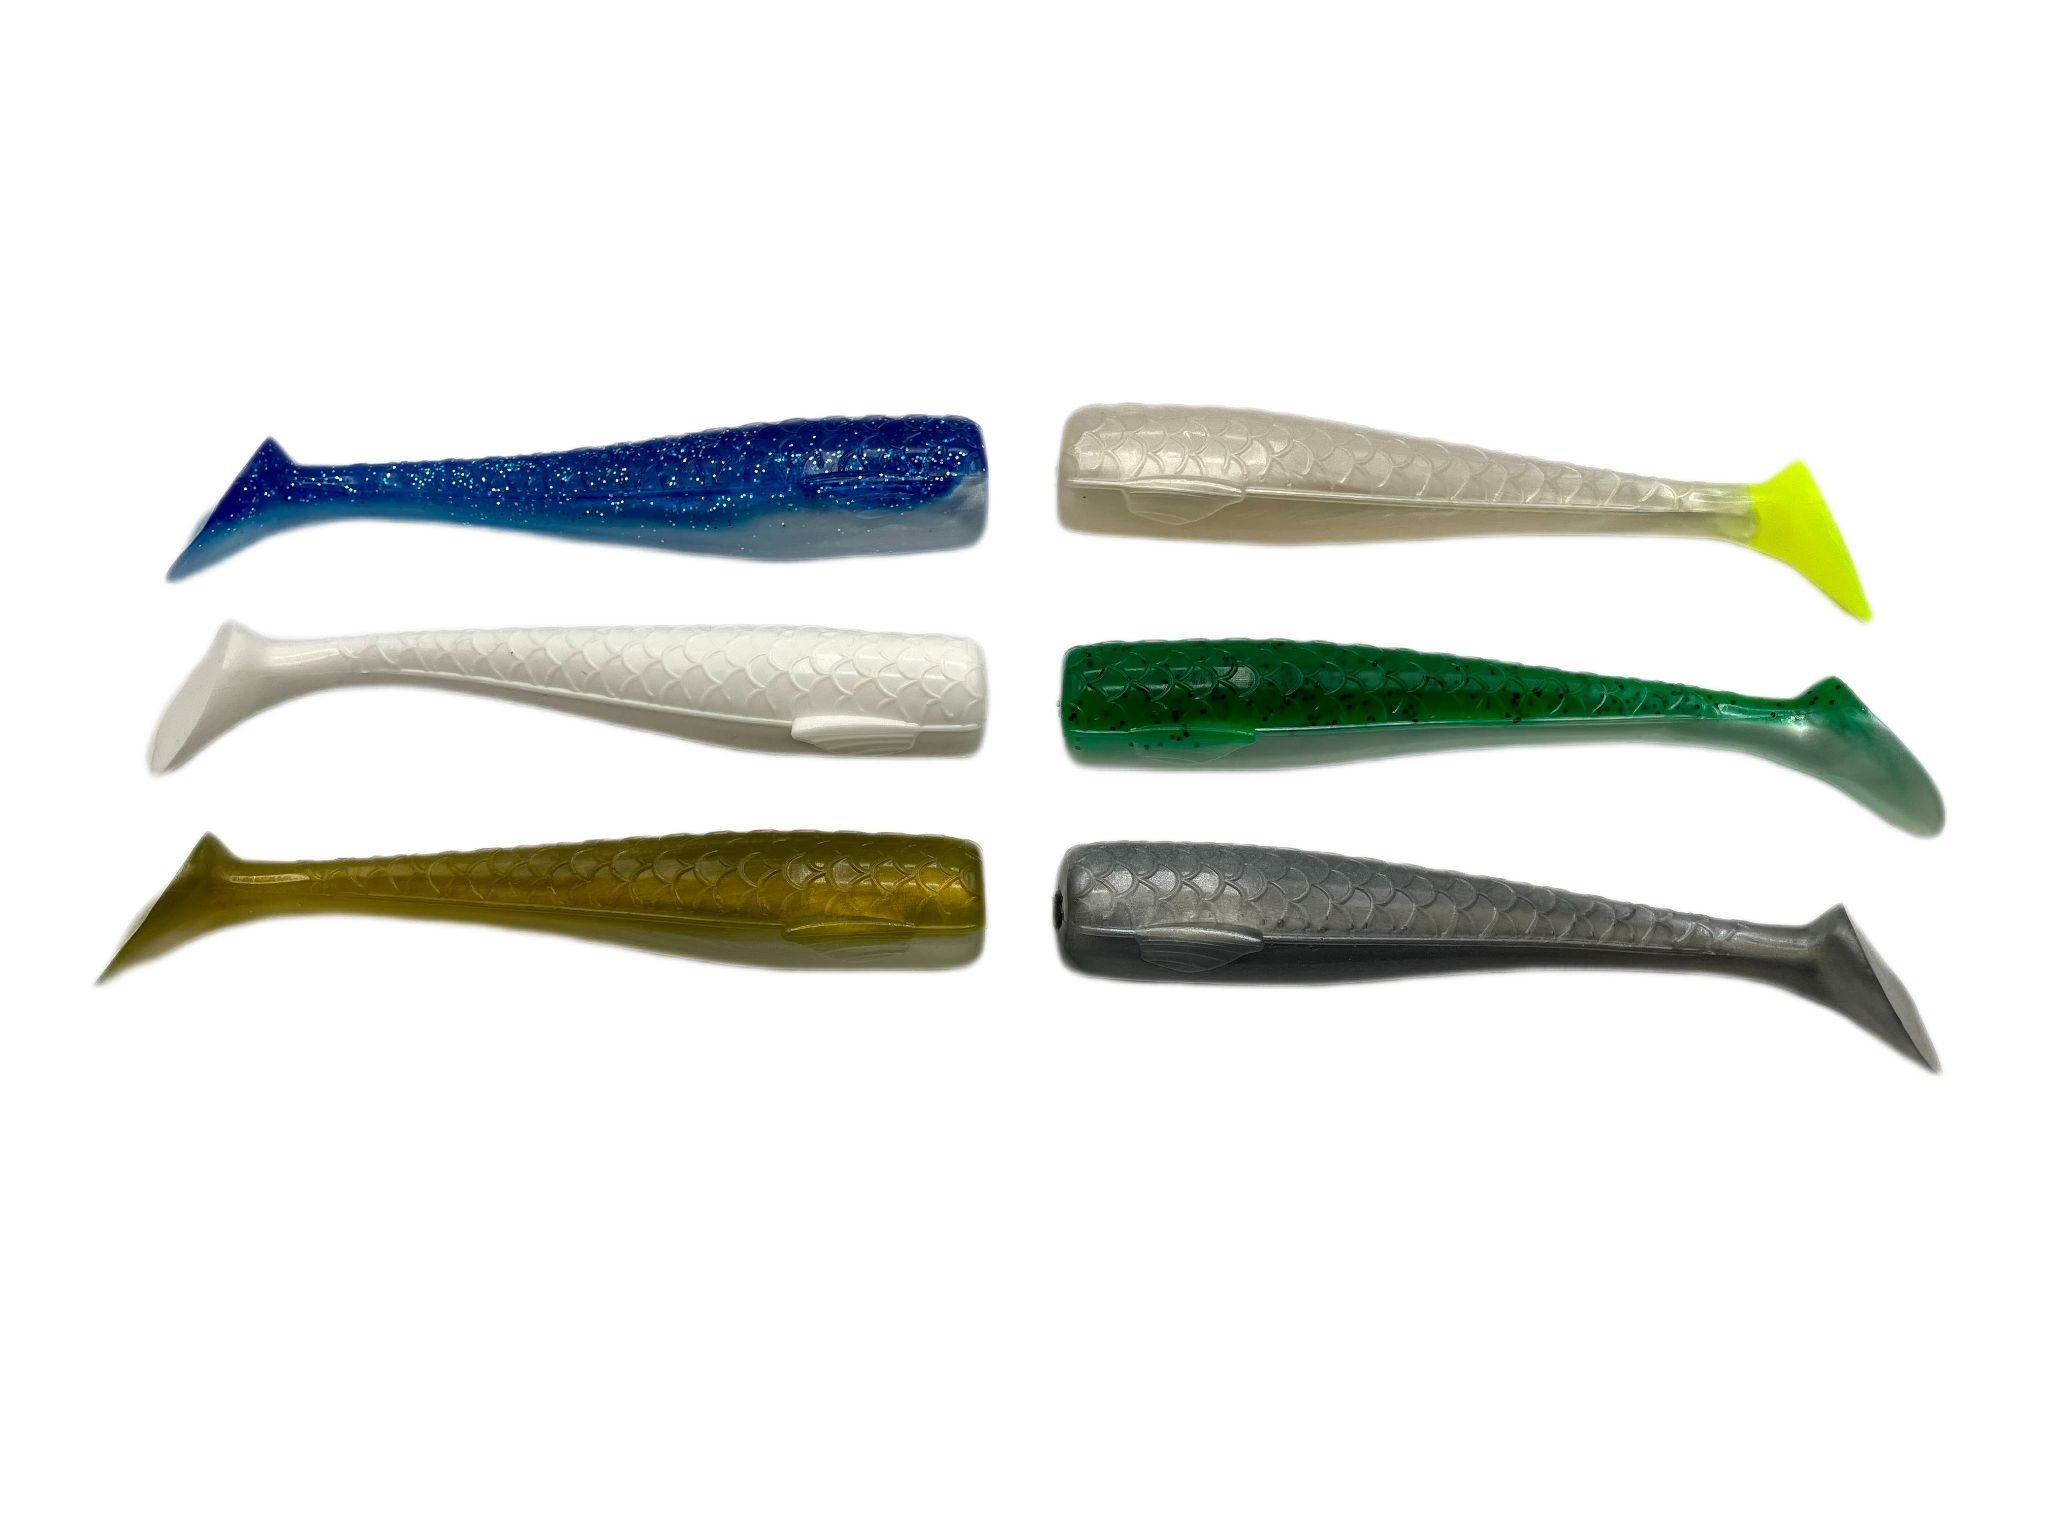 https://ronzlures.com/wp-content/uploads/2022/06/zfin-tails-1.png